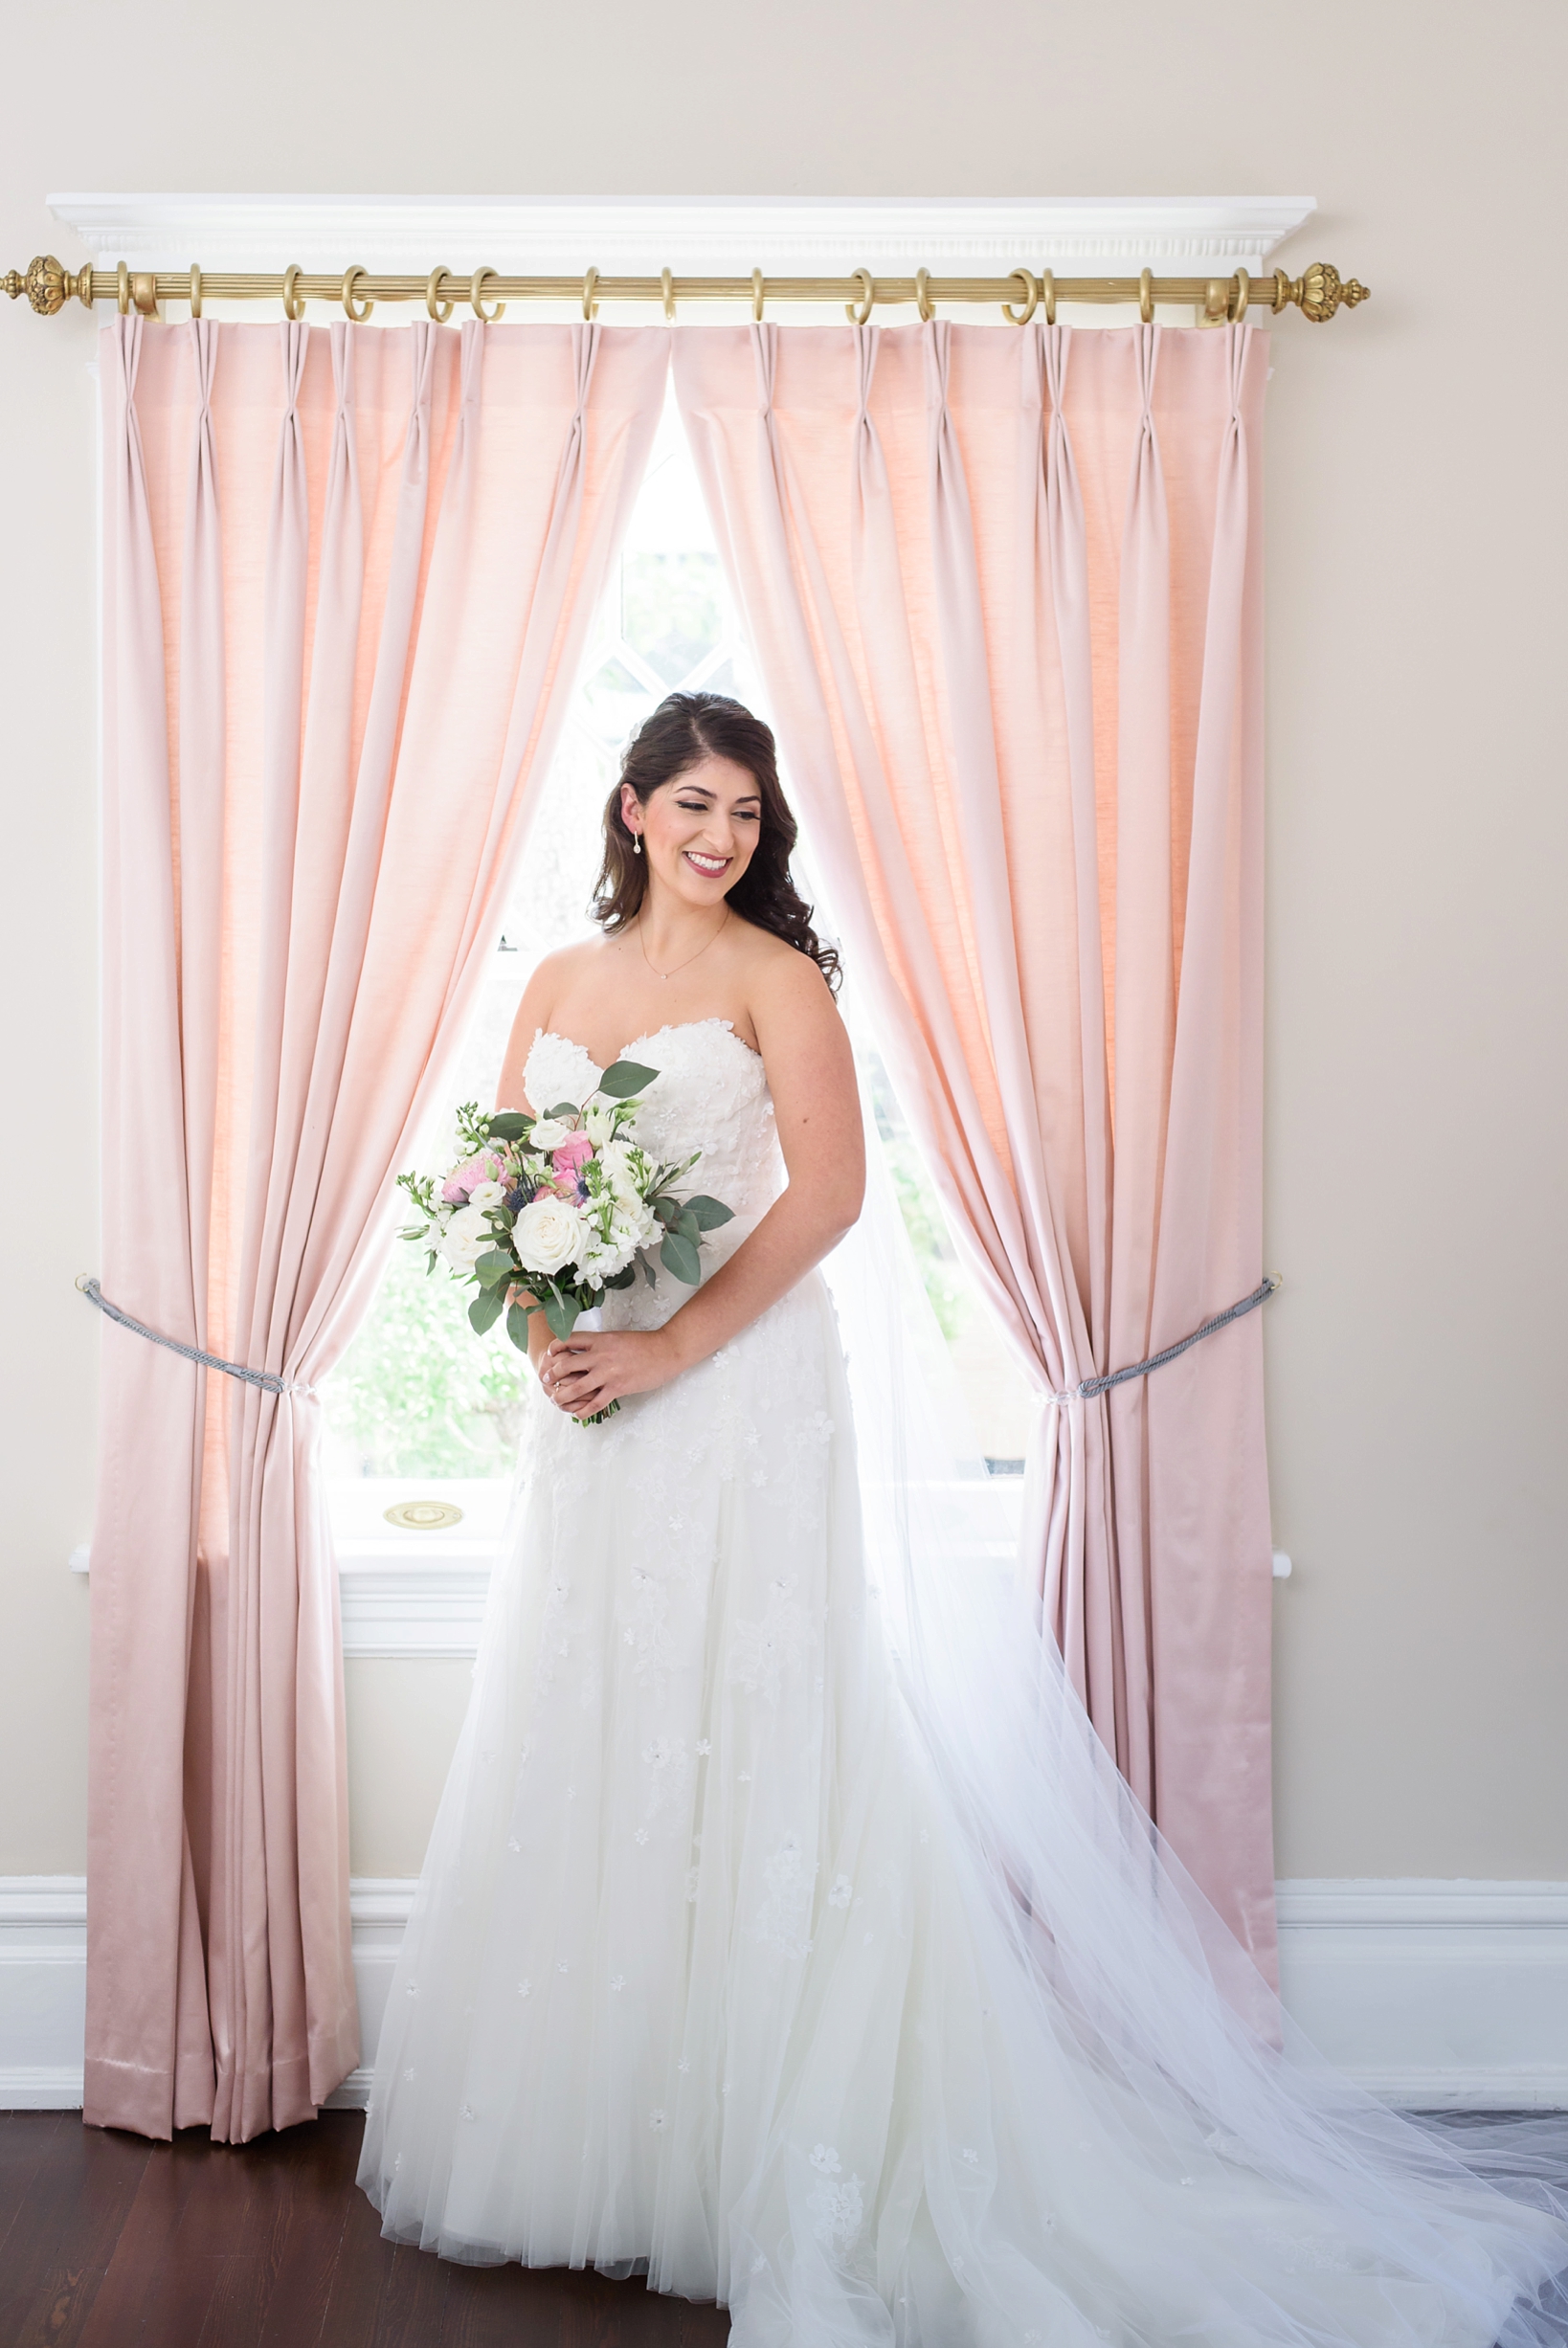 The bride holding her flowers in the arch of a window